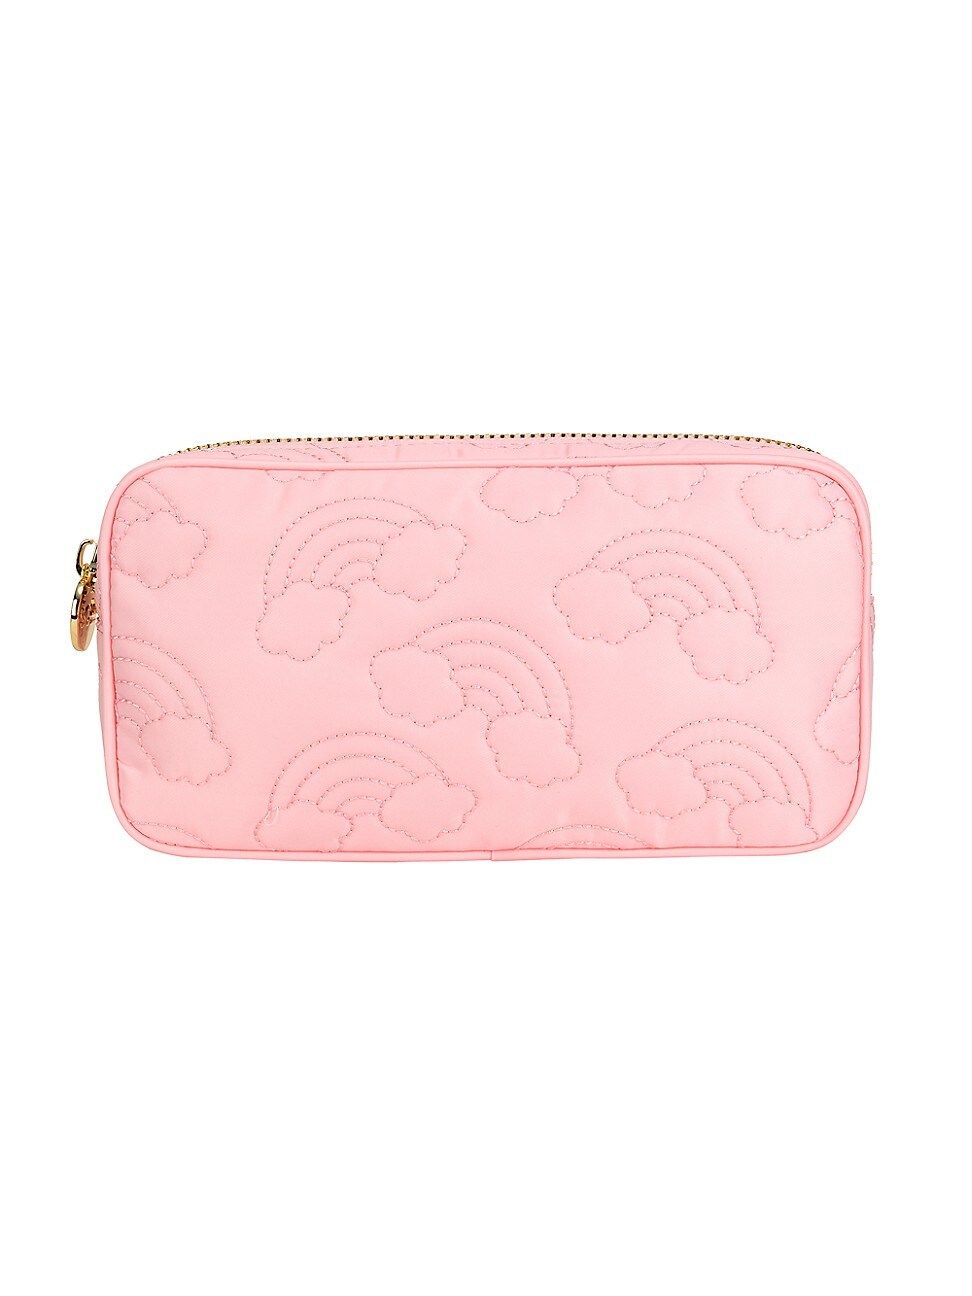 Stoney Clover Lane Small Puffy Over The Rainbow Pouch | Saks Fifth Avenue